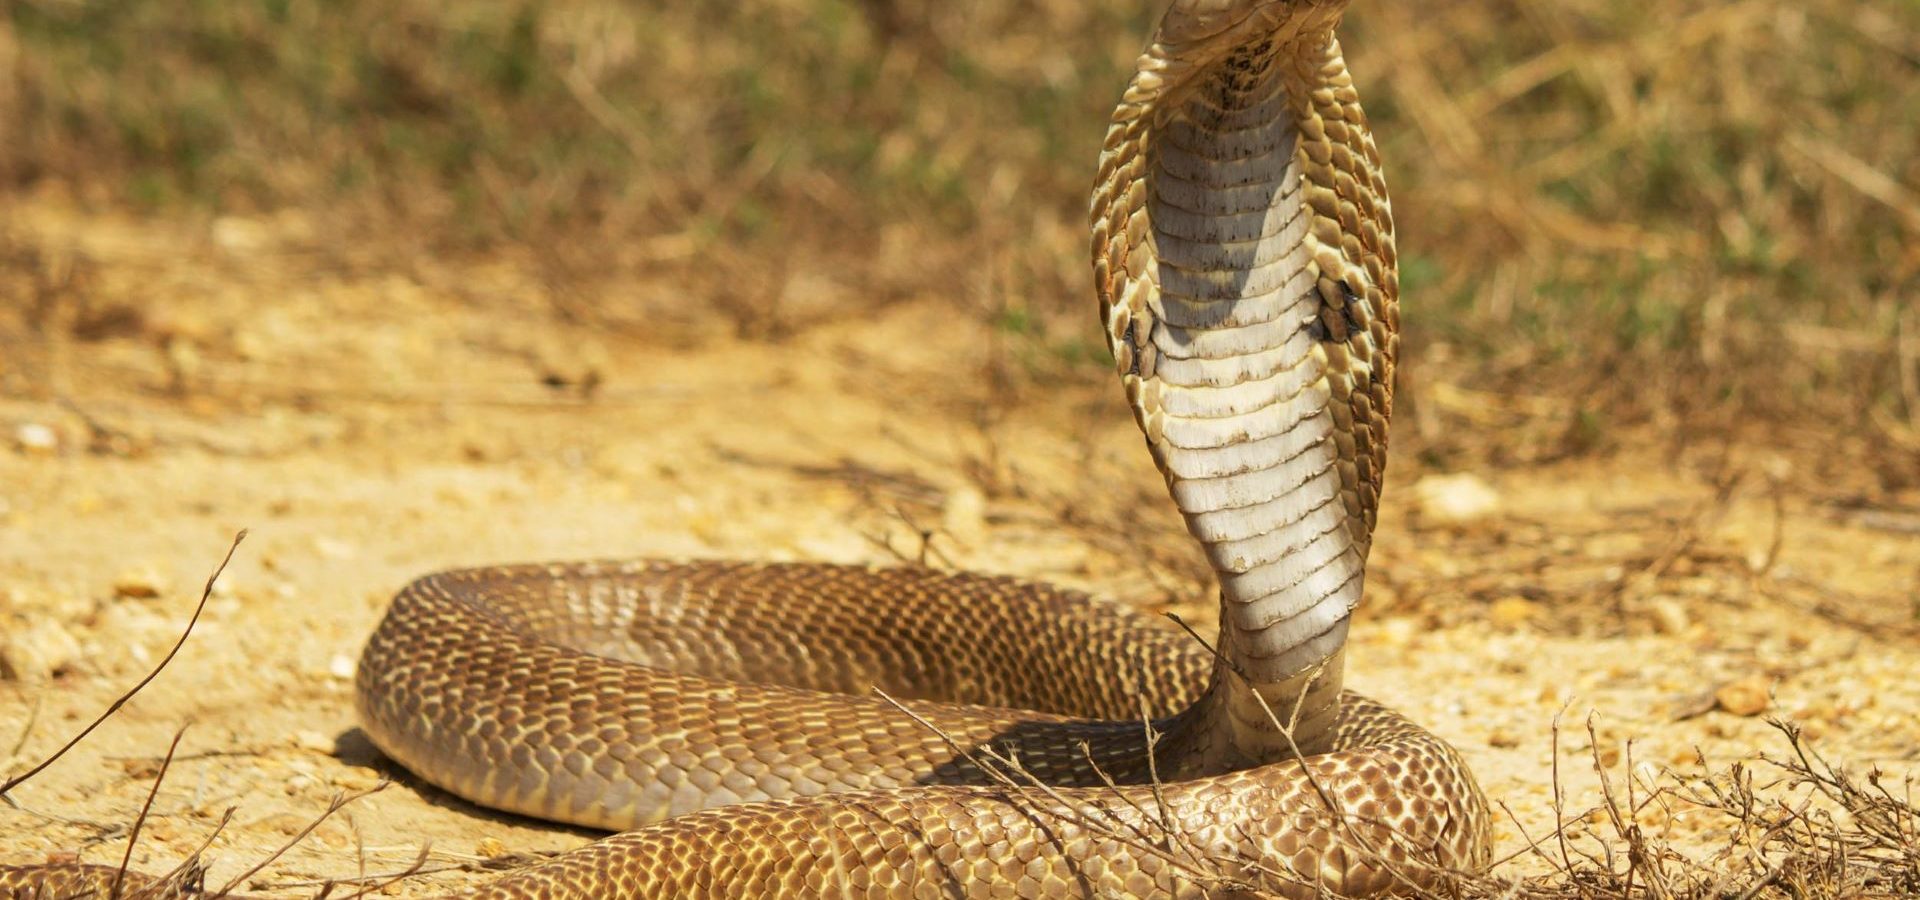 10 Fascinating Behaviors Exhibited by Snakes in the Wild